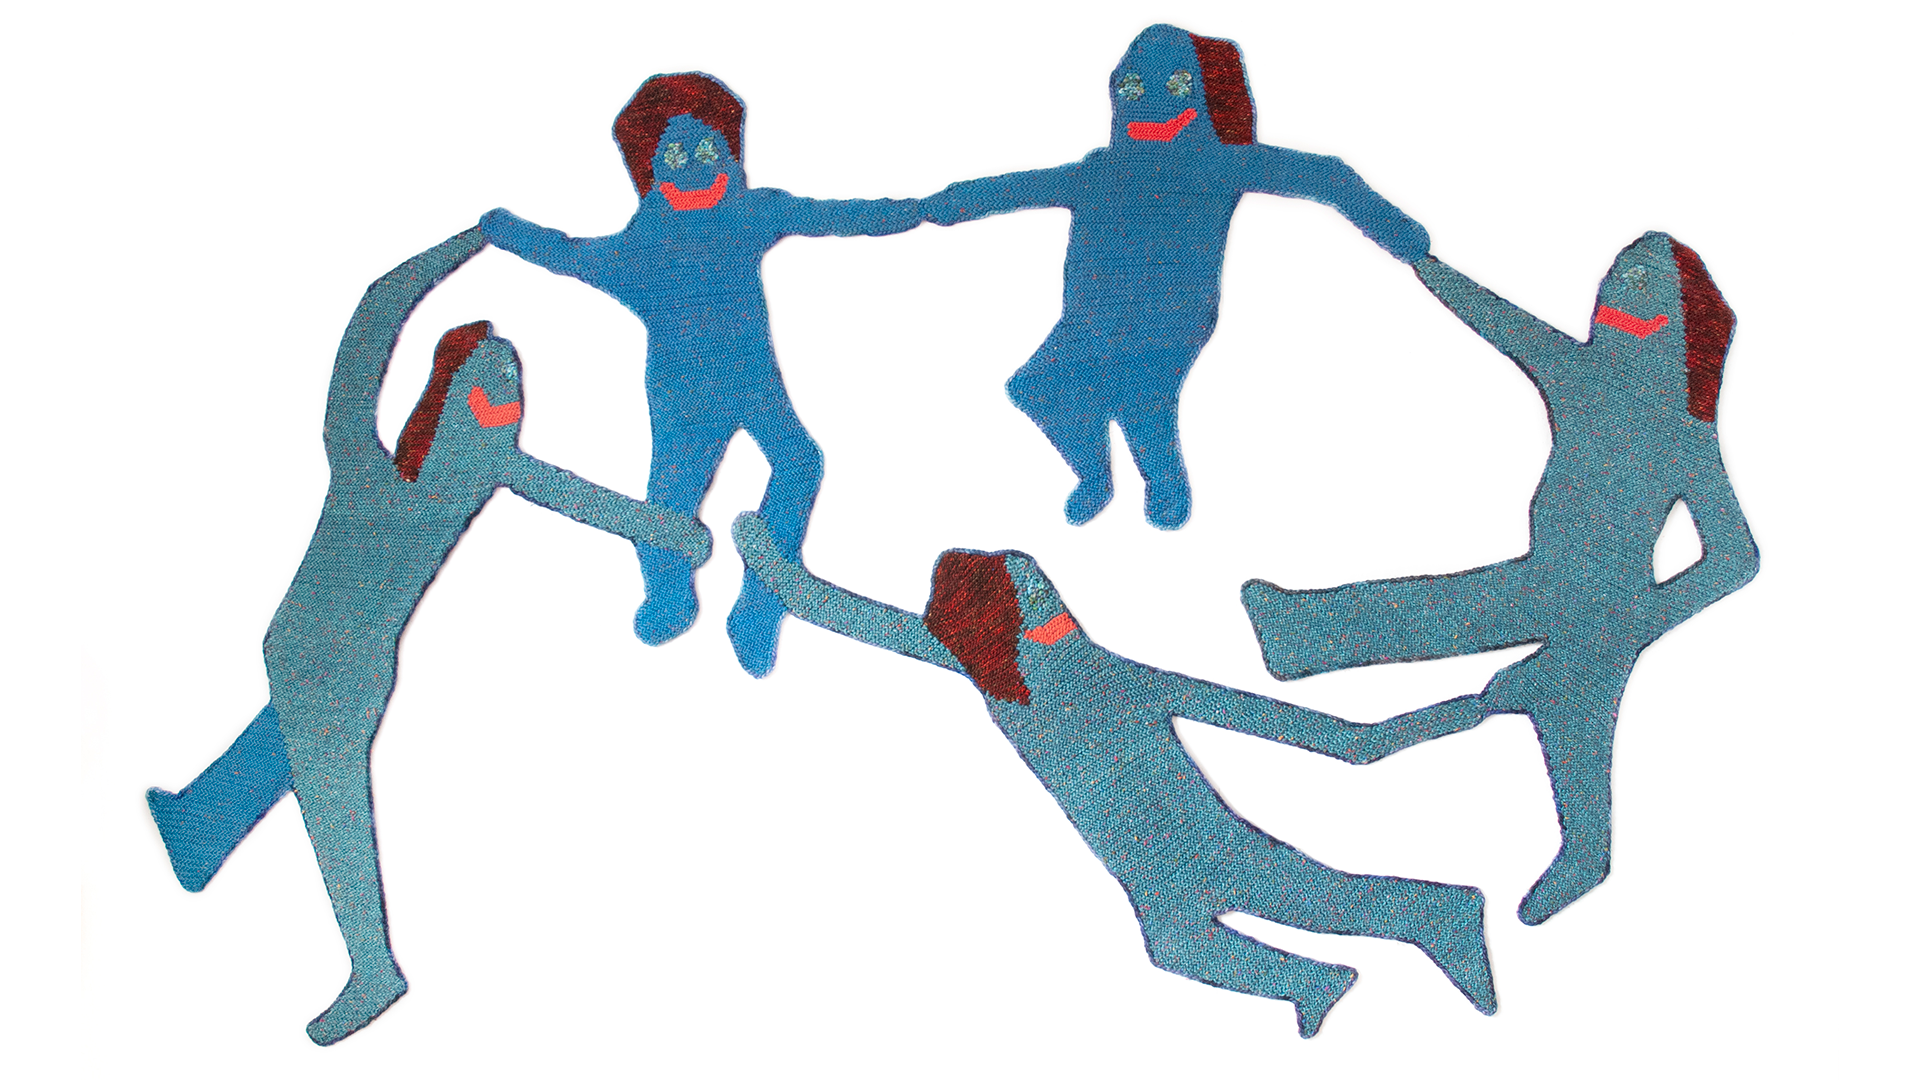 Blue crocheted figures holding hands in a circle